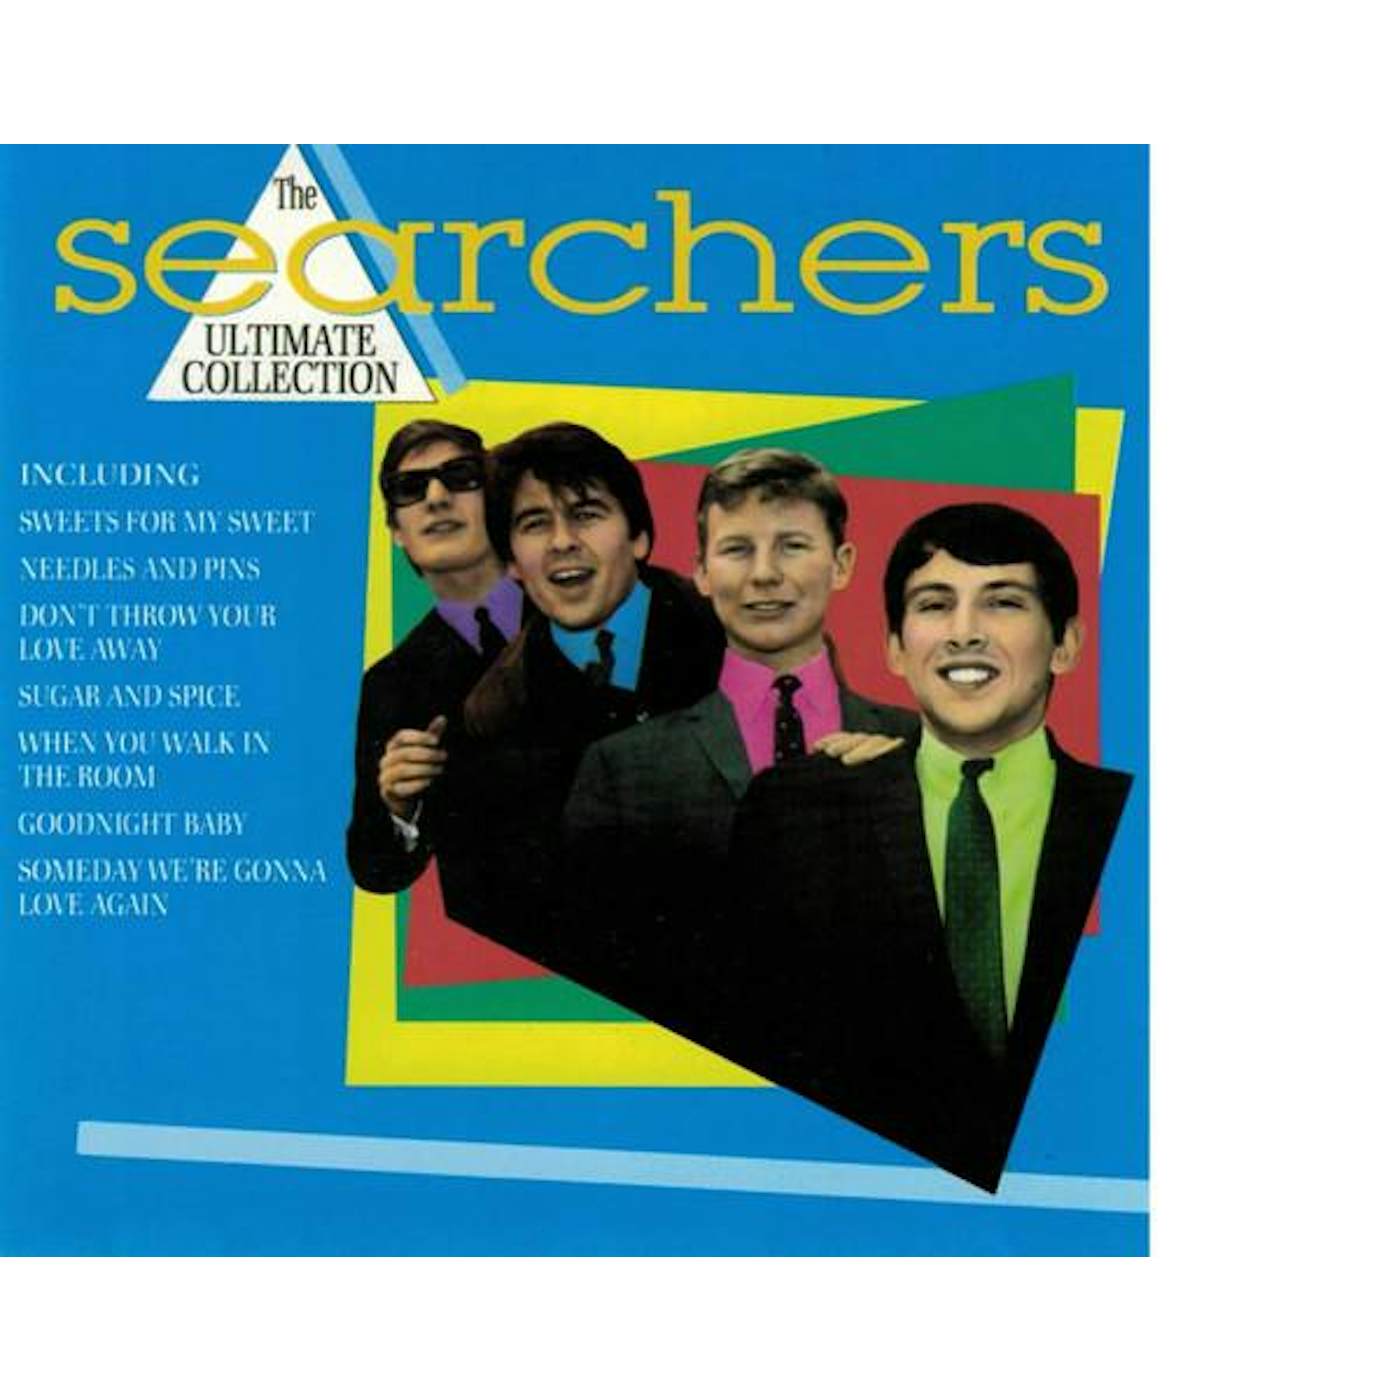 The Searchers ULTIMATE COLLECTION CD